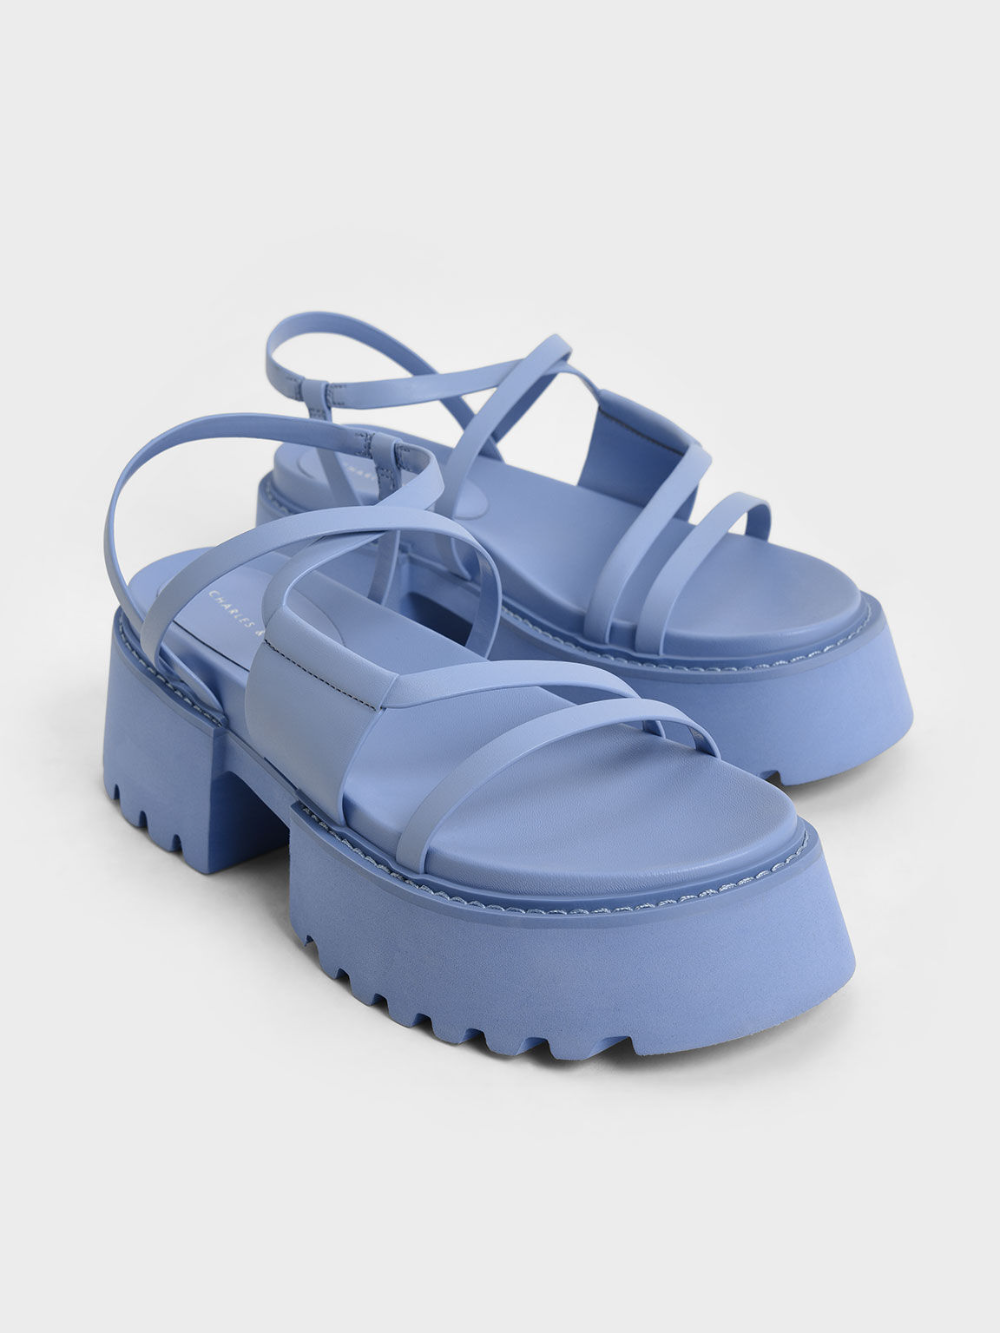 How to Wear Blue Sandals: Top 15 Stylish & Casual Outfit Ideas for Ladies